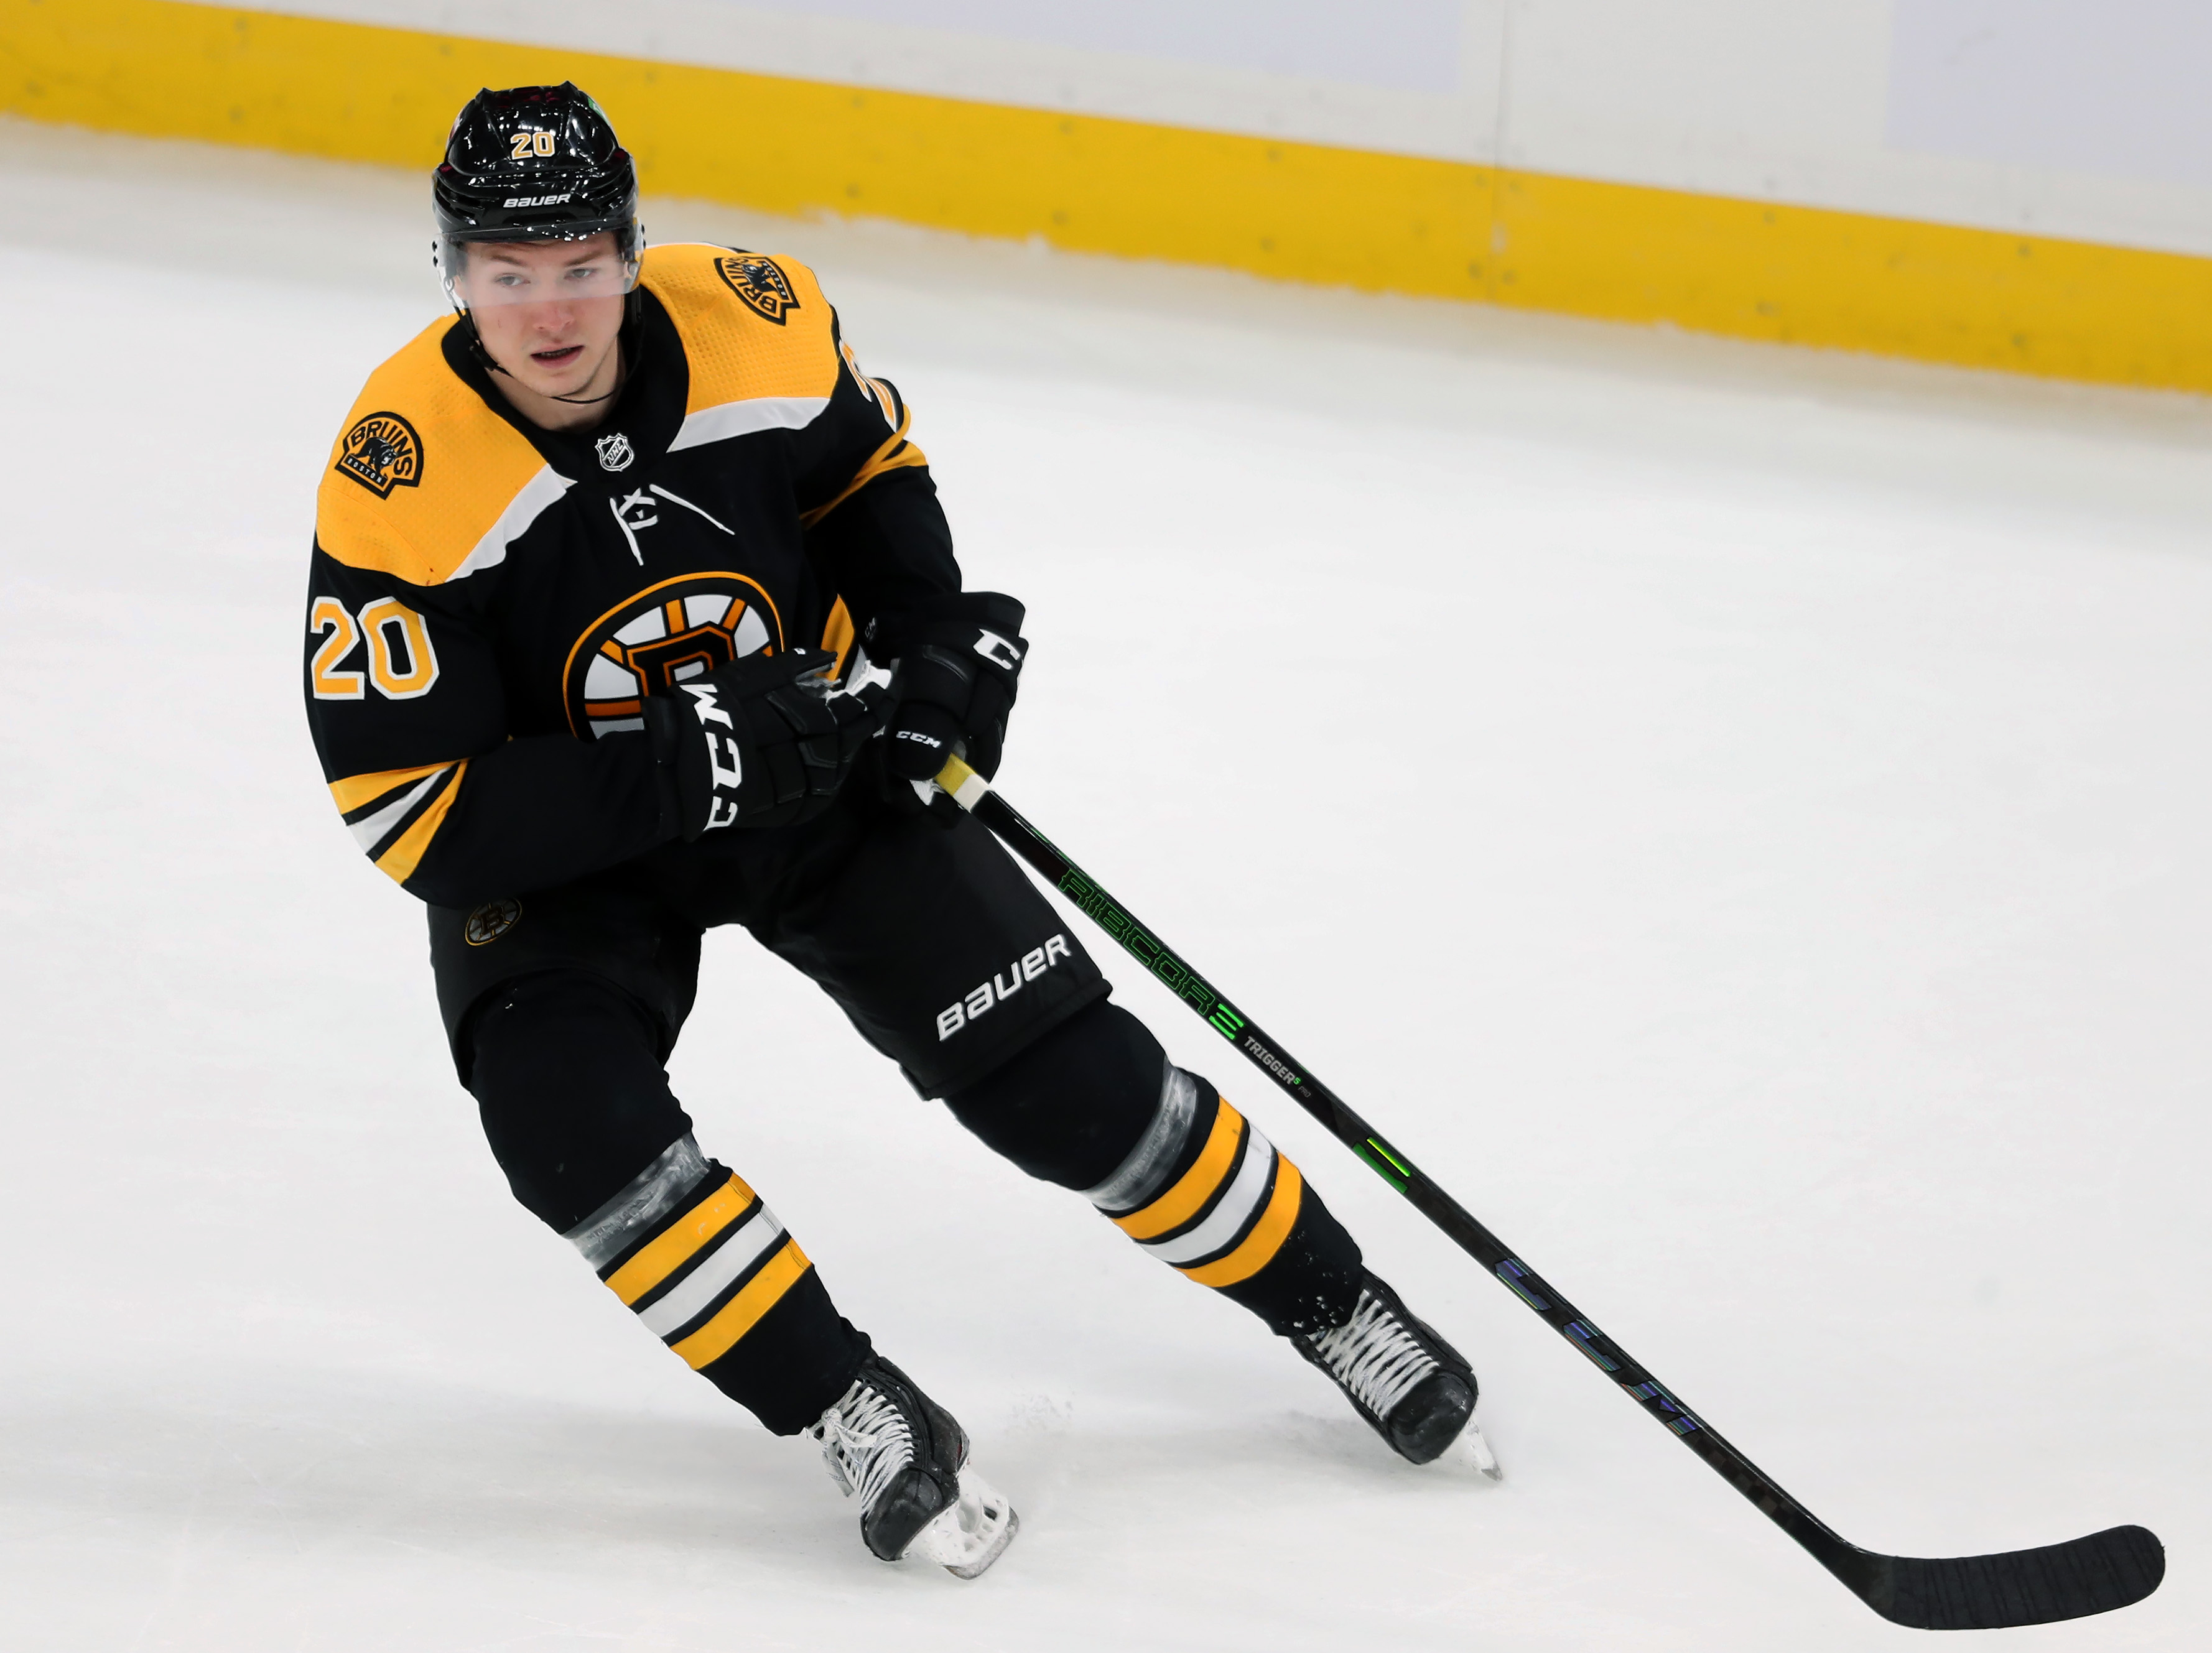 Bruins Should Approach Curtis Lazar Contract Negotiations With Caution